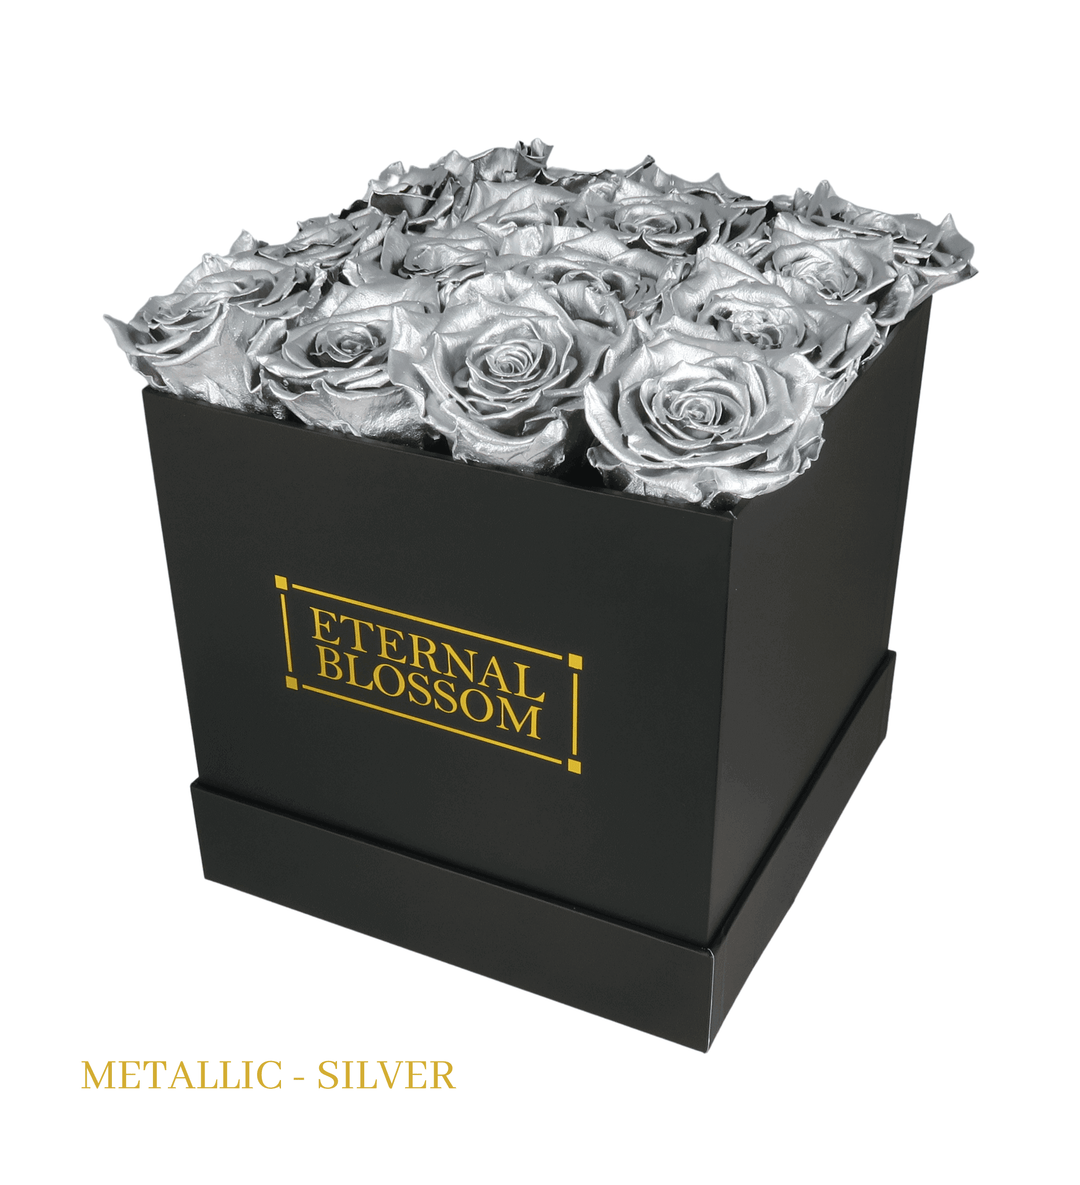 16 Piece Blossom Box - Black Box - All Colours of Year Lasting Infinity Roses - Eternal Blossom